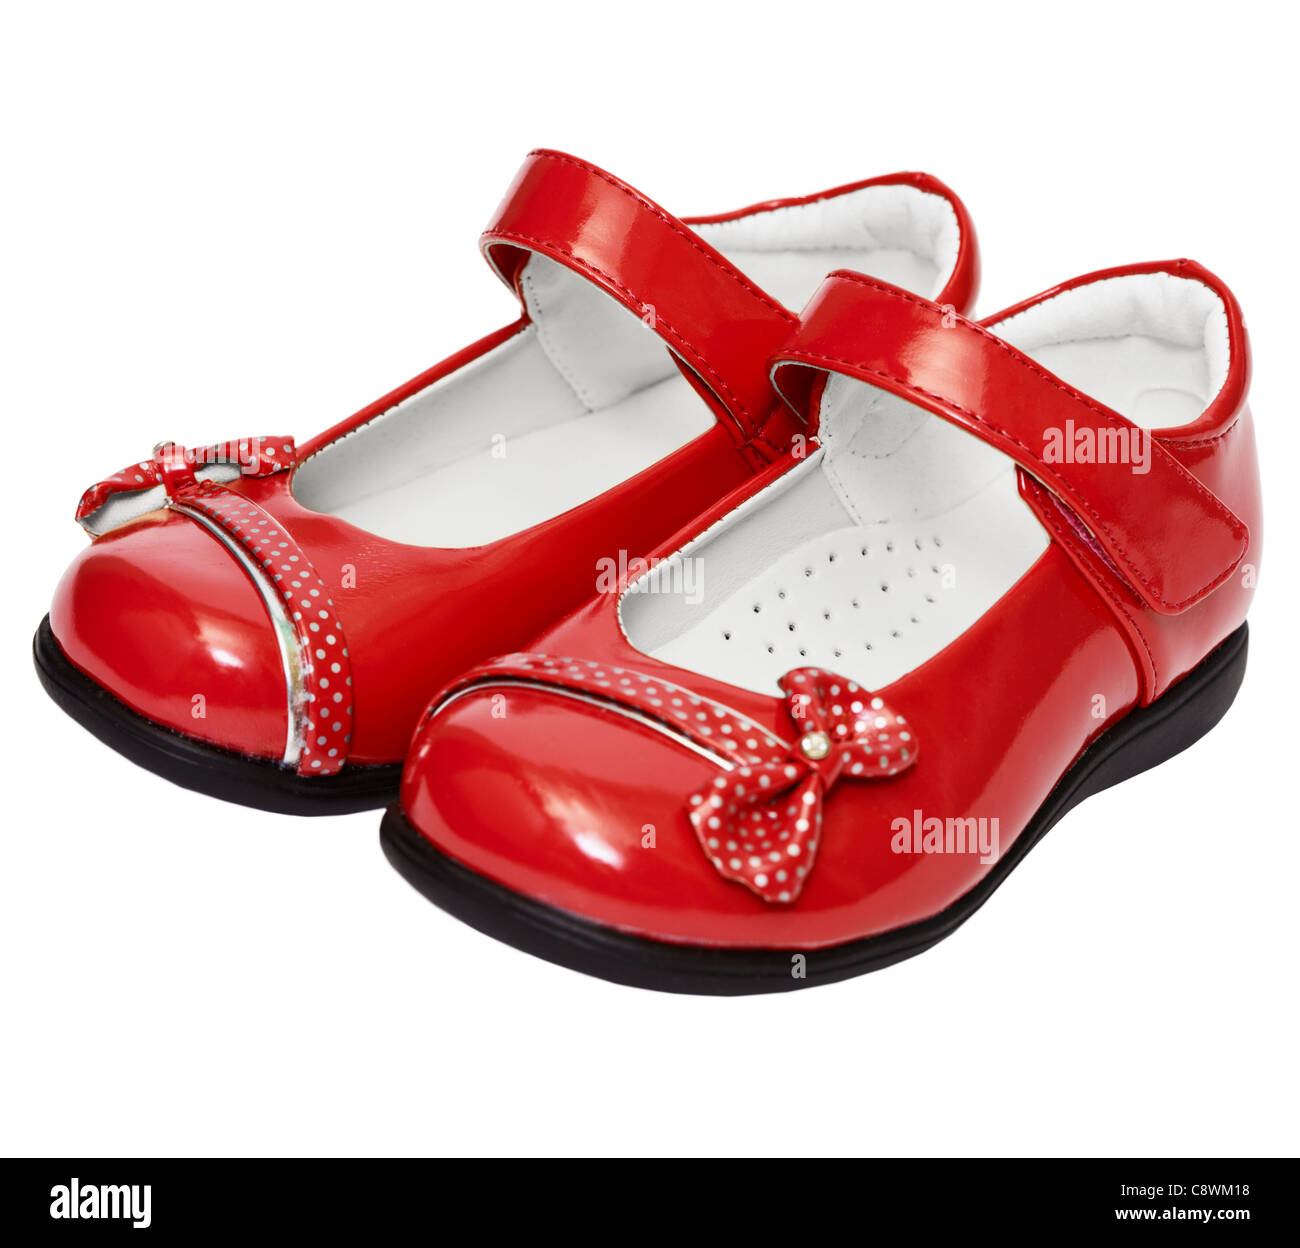 Lady's red shoes isolated on white background Stock Photo